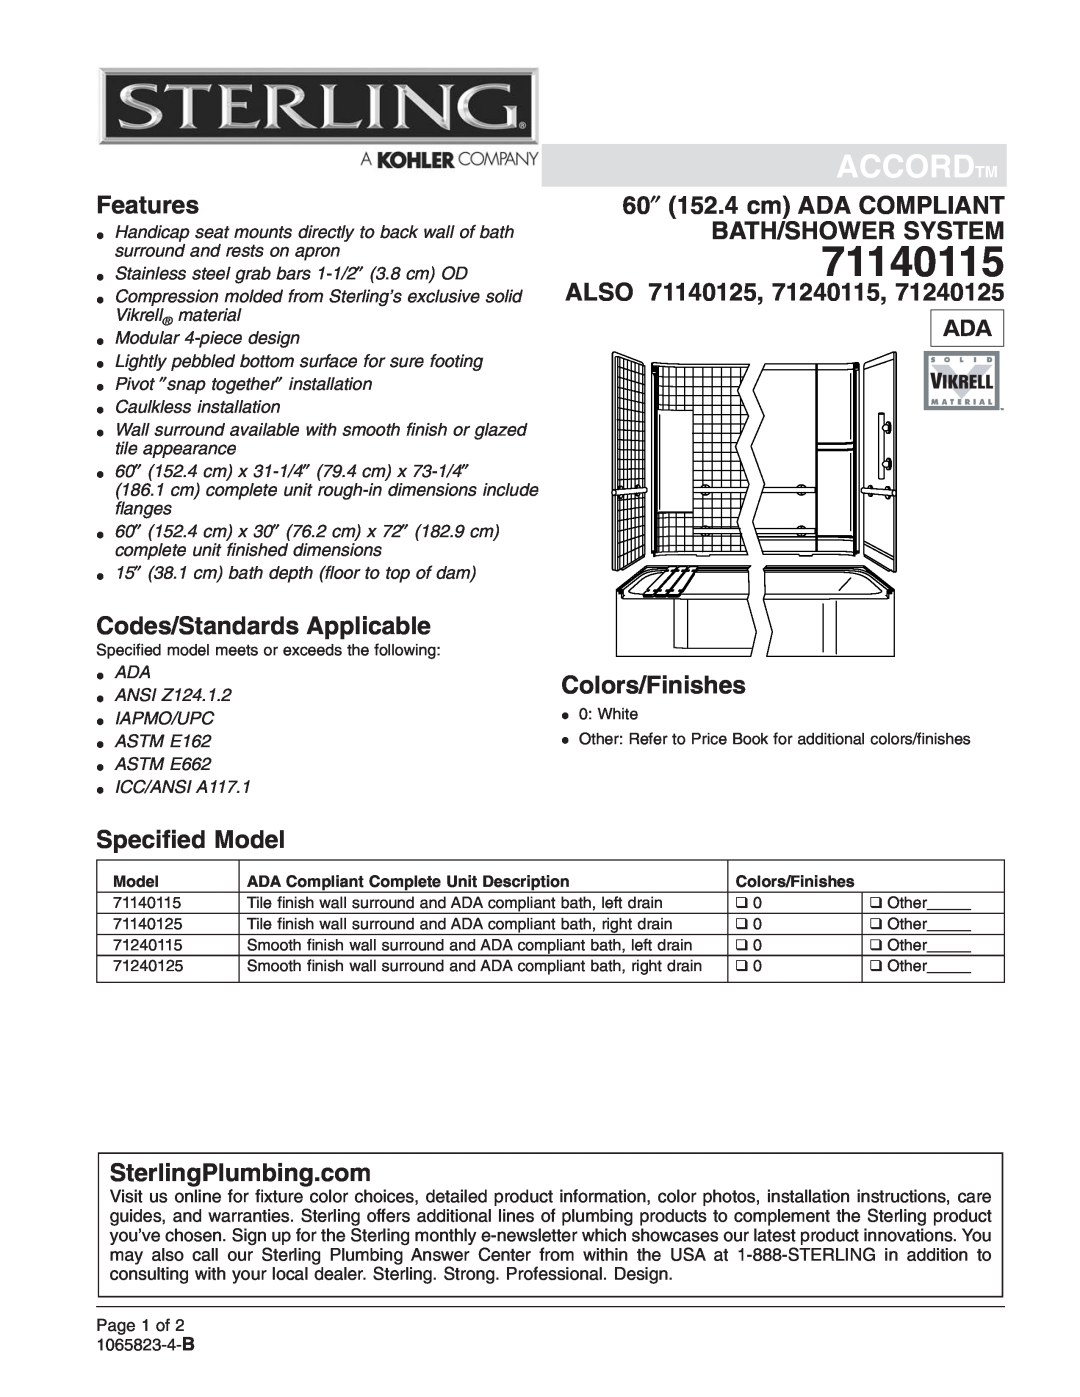 Sterling Plumbing 71240115 dimensions Accordtm, Features, Codes/Standards Applicable, Also, Colors/Finishes, 71140115 